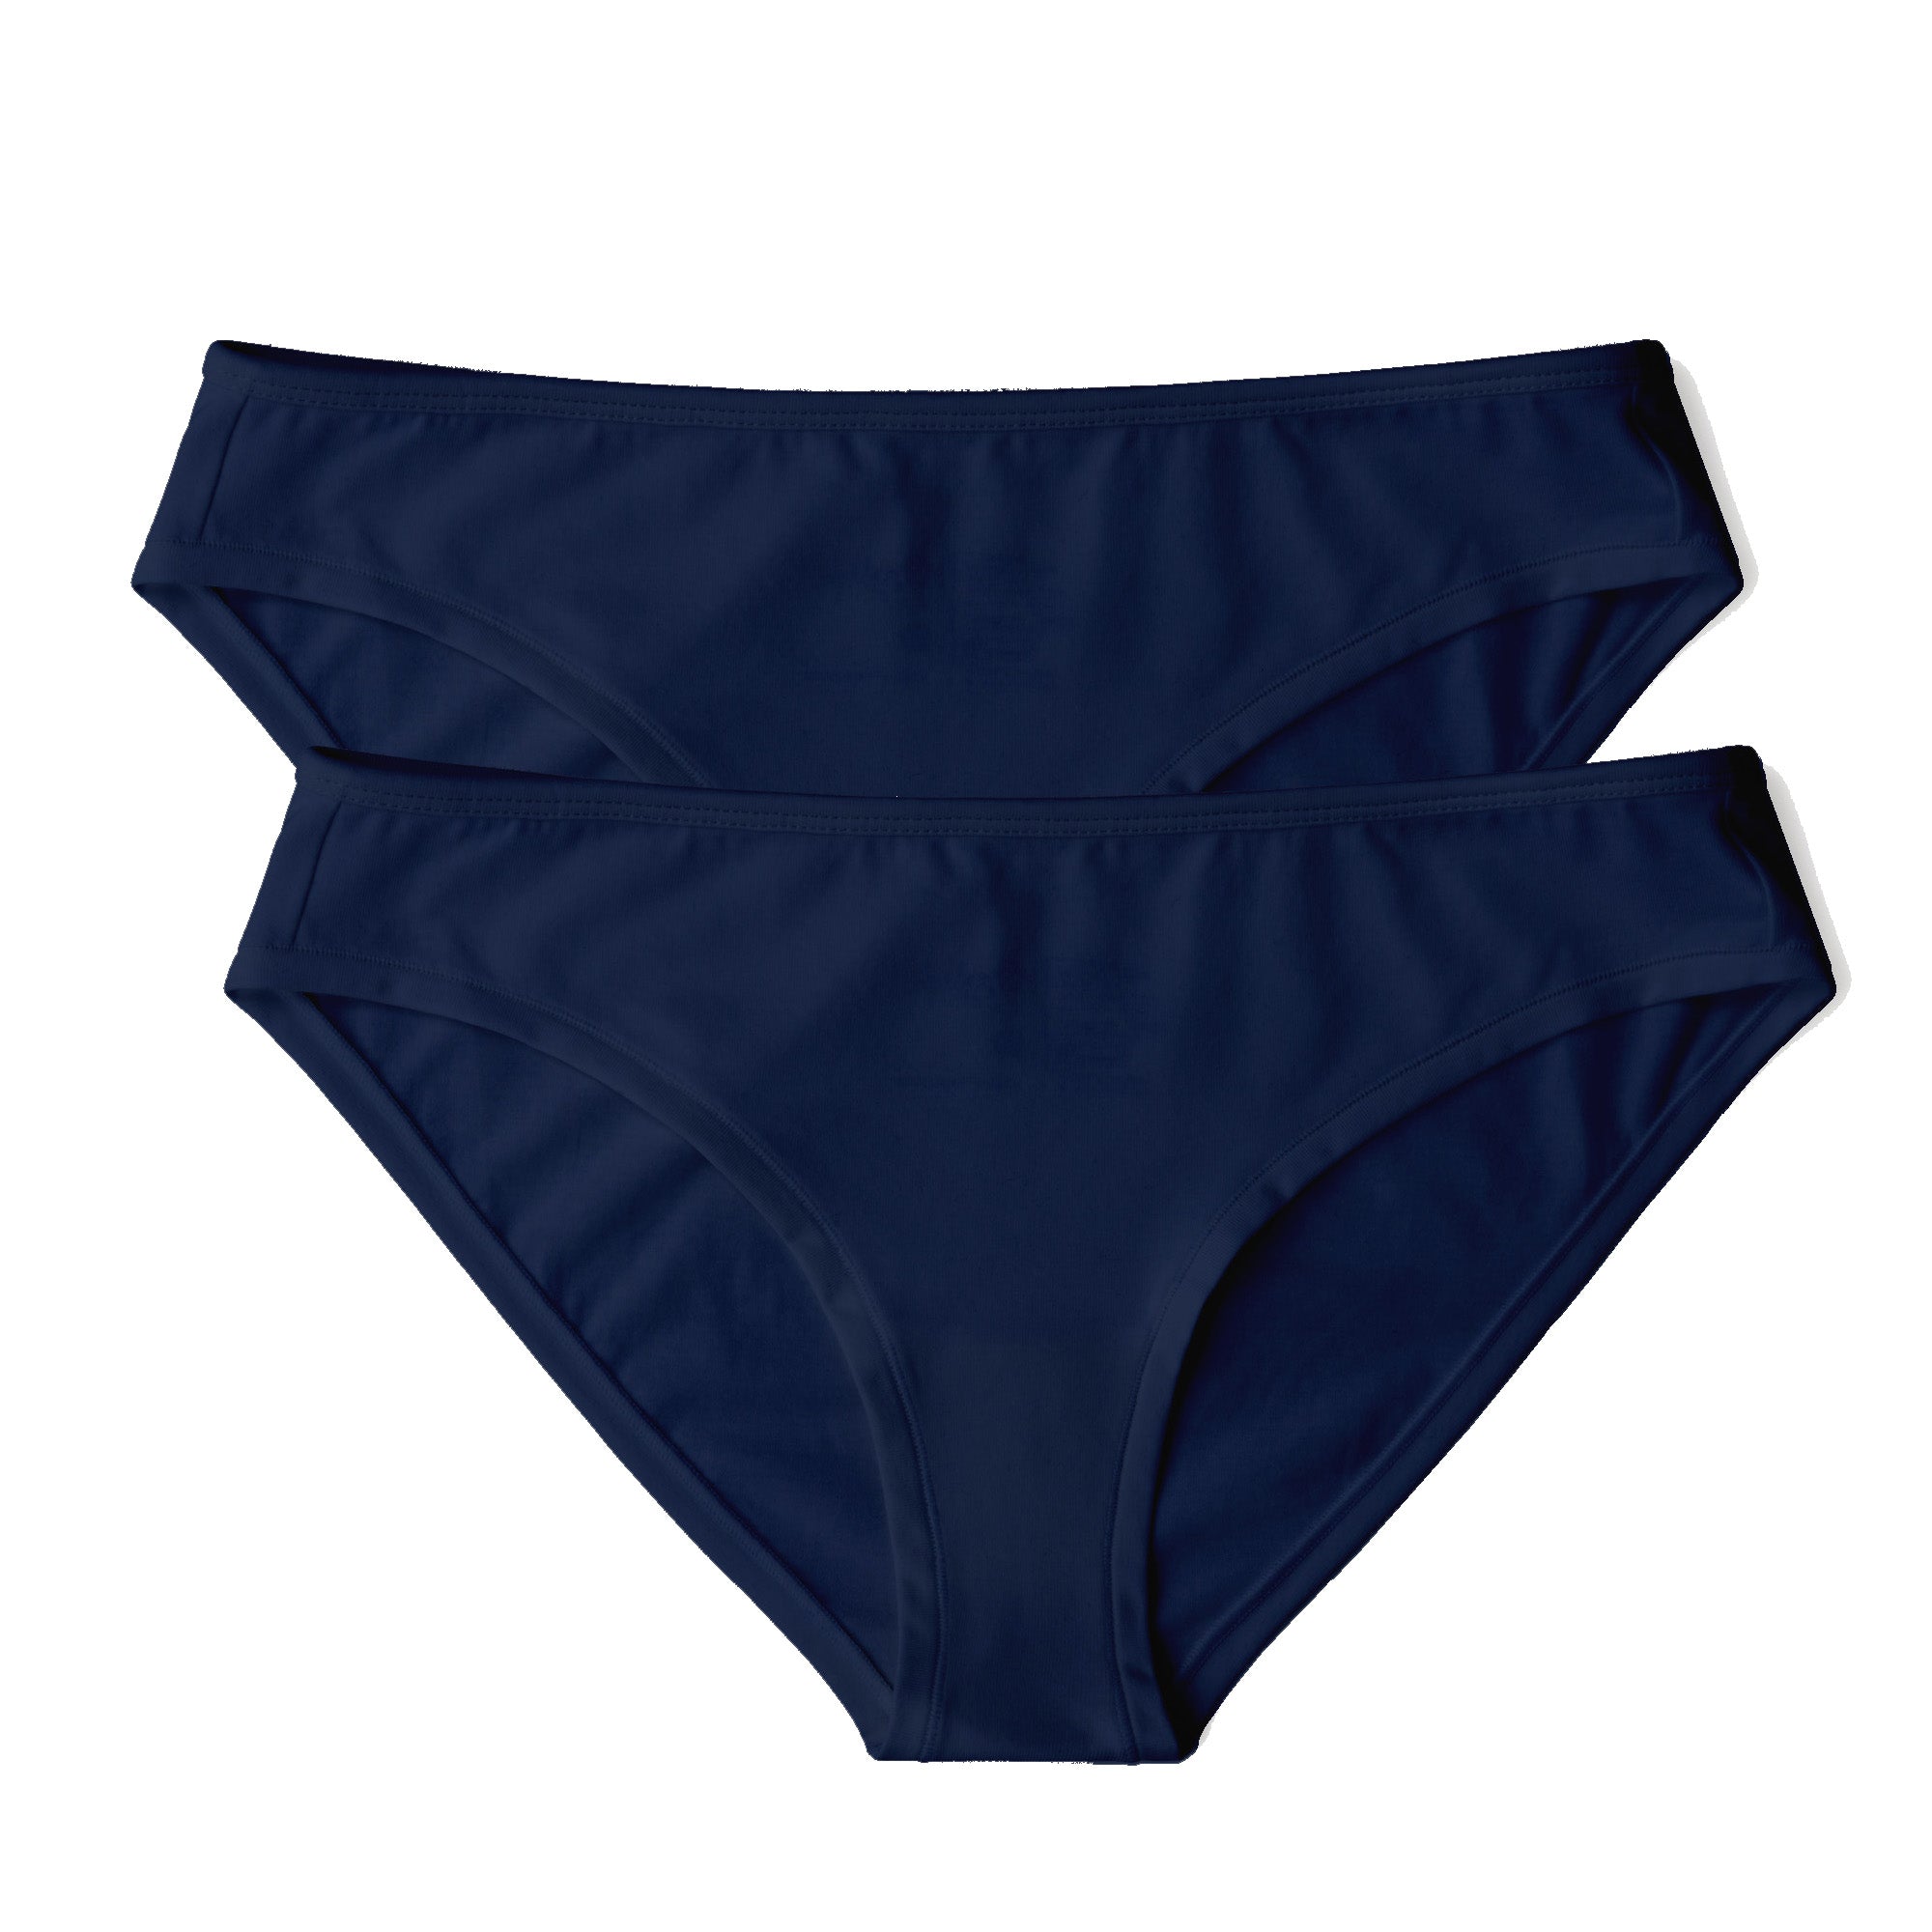 ladies briefs navy organic cotton biodegradable recycled multipack